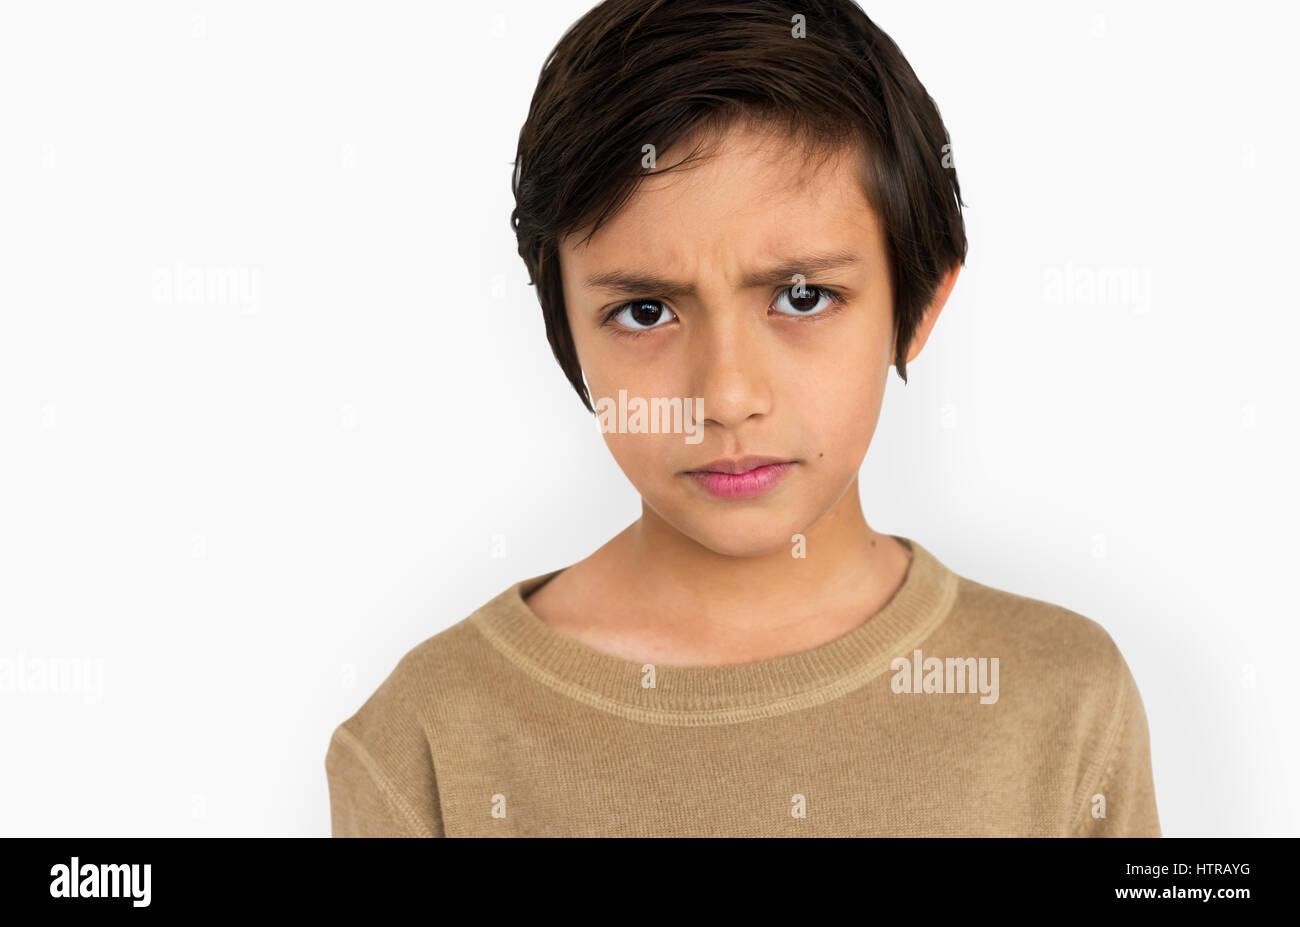 Little Boy Frowning Sad Concept Stock Photo